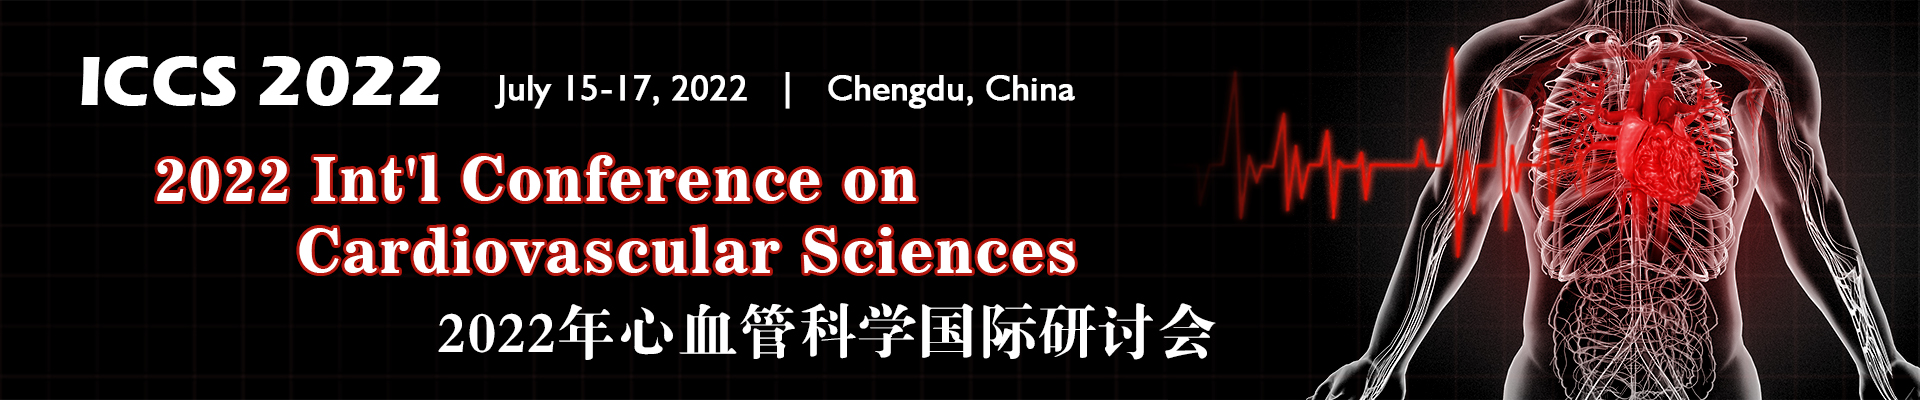 2022 International Conference on Cardiovascular Sciences (ICCS 2022), Chengdu Xinliang Hotel, Sichuan, China